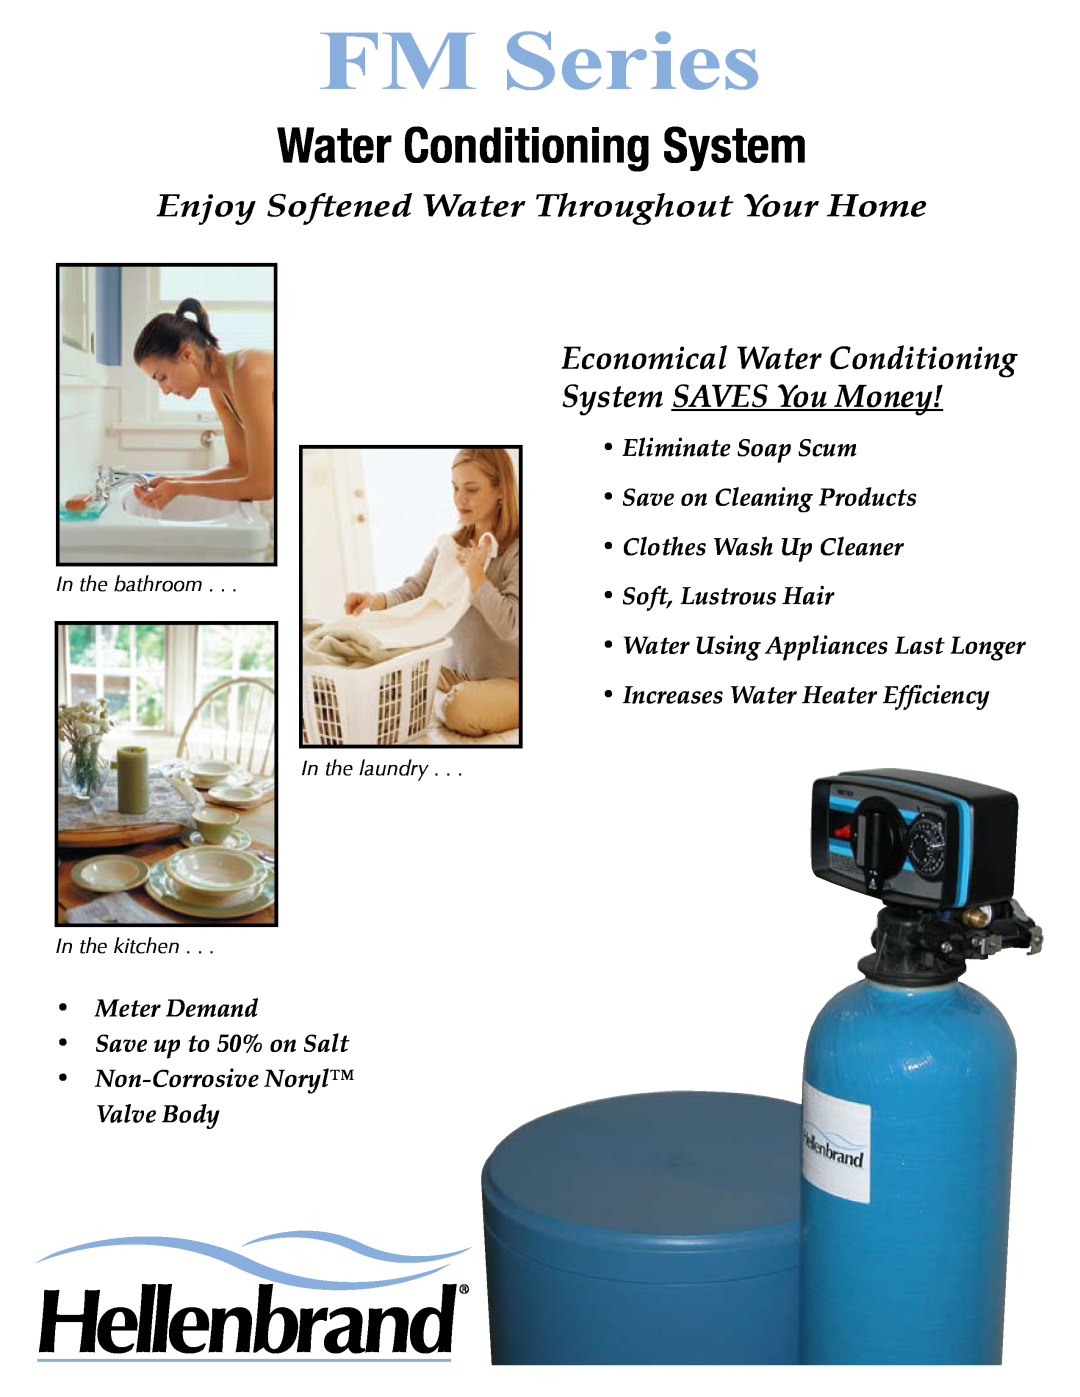 Hellenbrand FM Series manual Water Conditioning System, Enjoy Softened Water Throughout Your Home 